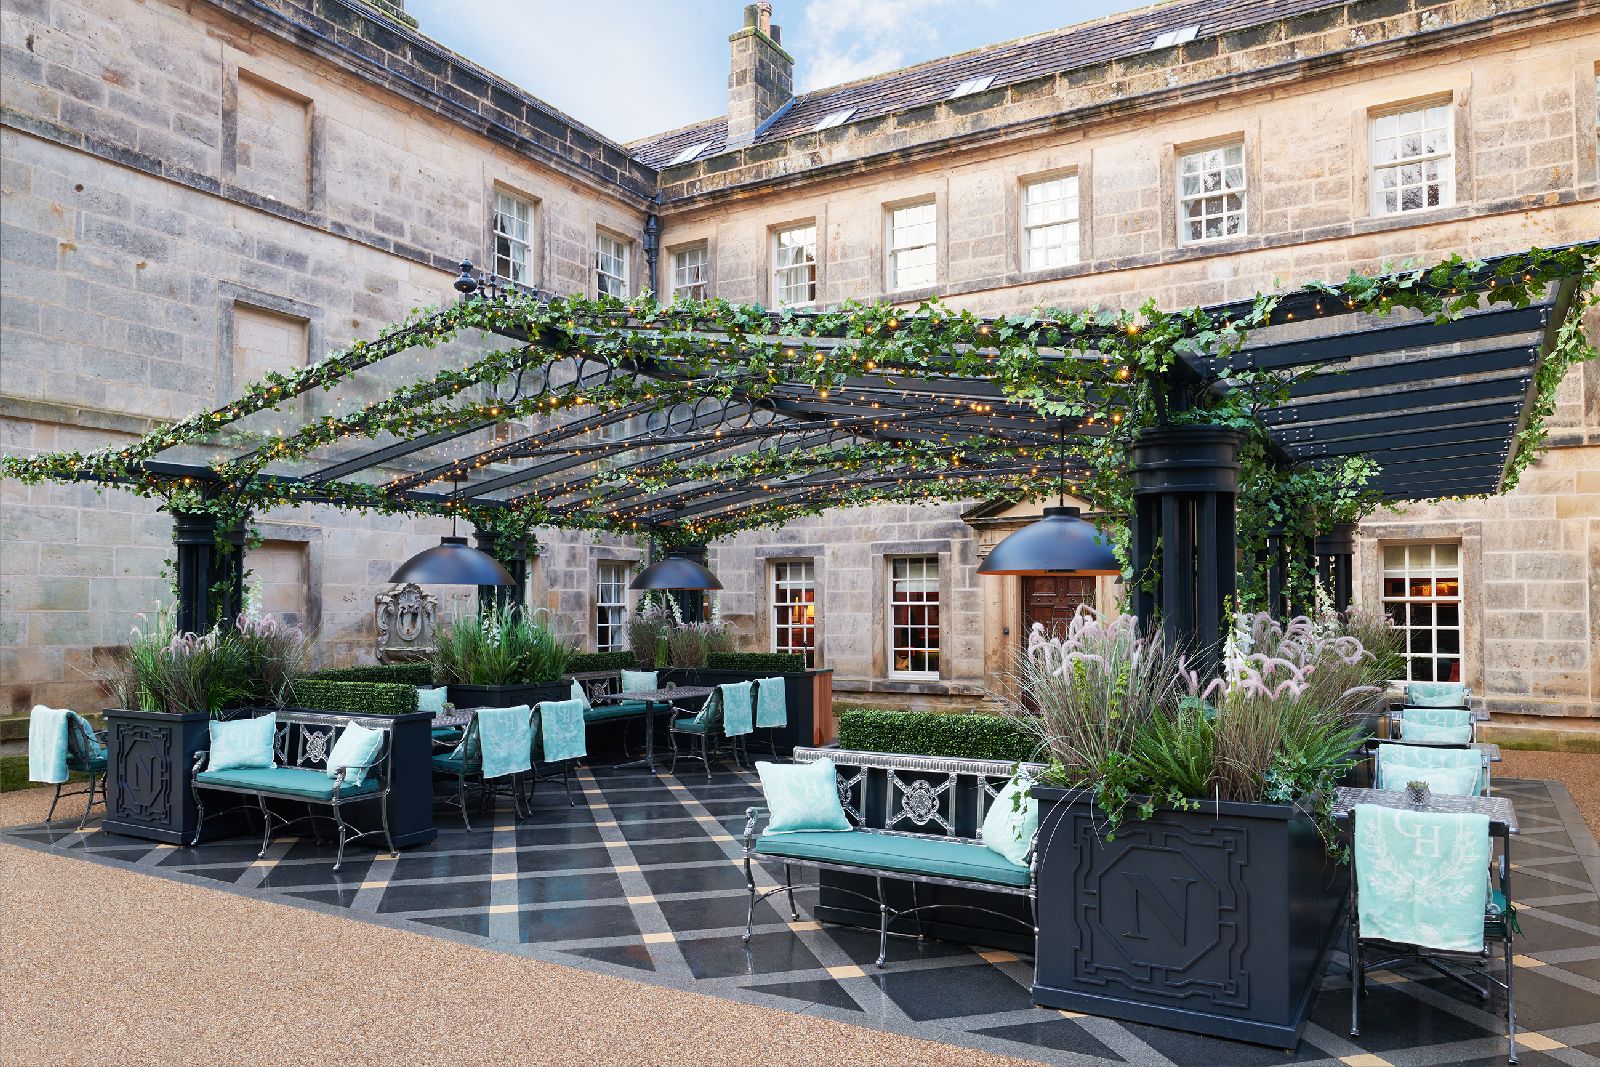 Outdoor dining at Grantley Hall hotel in Yorkshire England